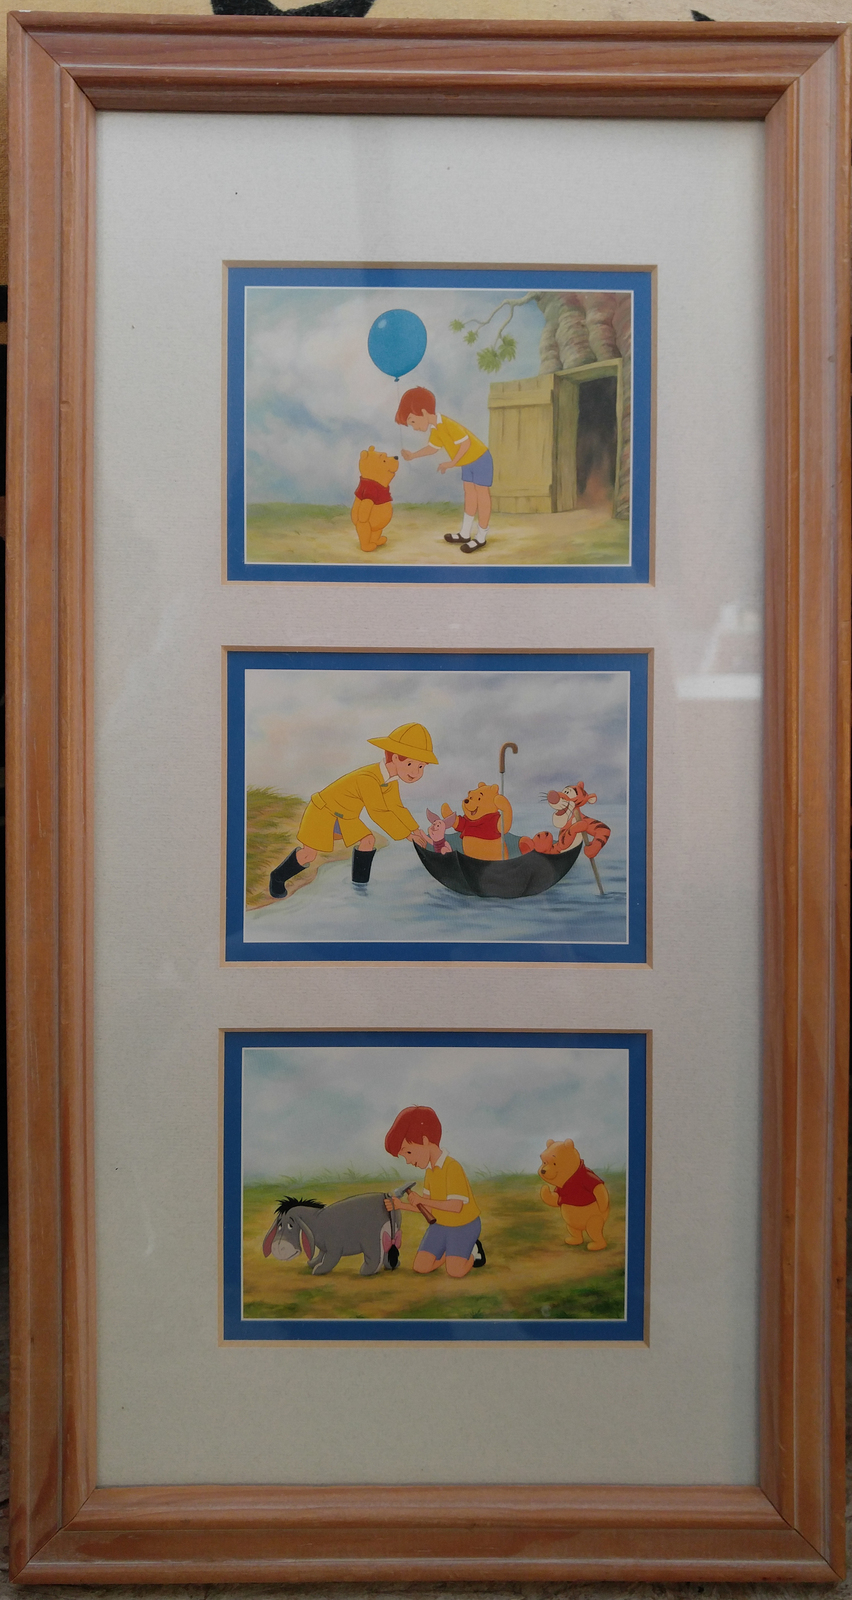 Disney Winnie the Pooh 100 Acre Wood Series Triple-Framed and Matted Prints - $15.99